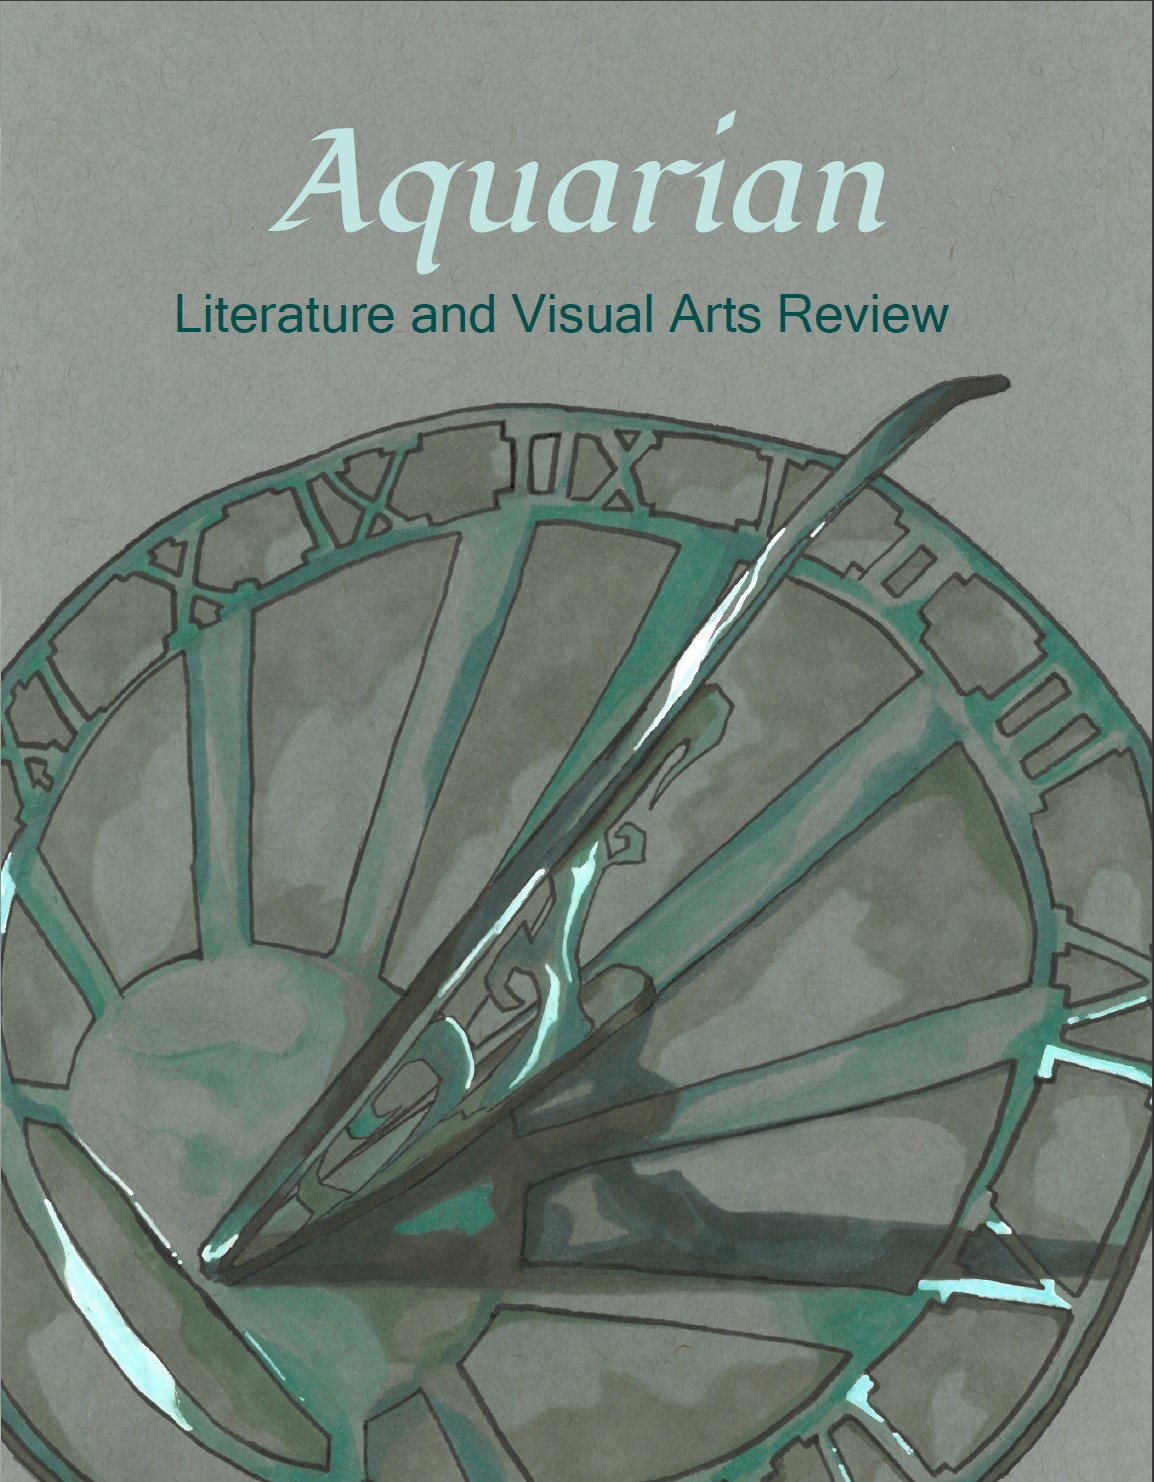 The 2020 Cover. It is monochrome green with a sundial taking up the bottom half of the cover. The top has the title Aquarian, Literary and Visual Arts Review